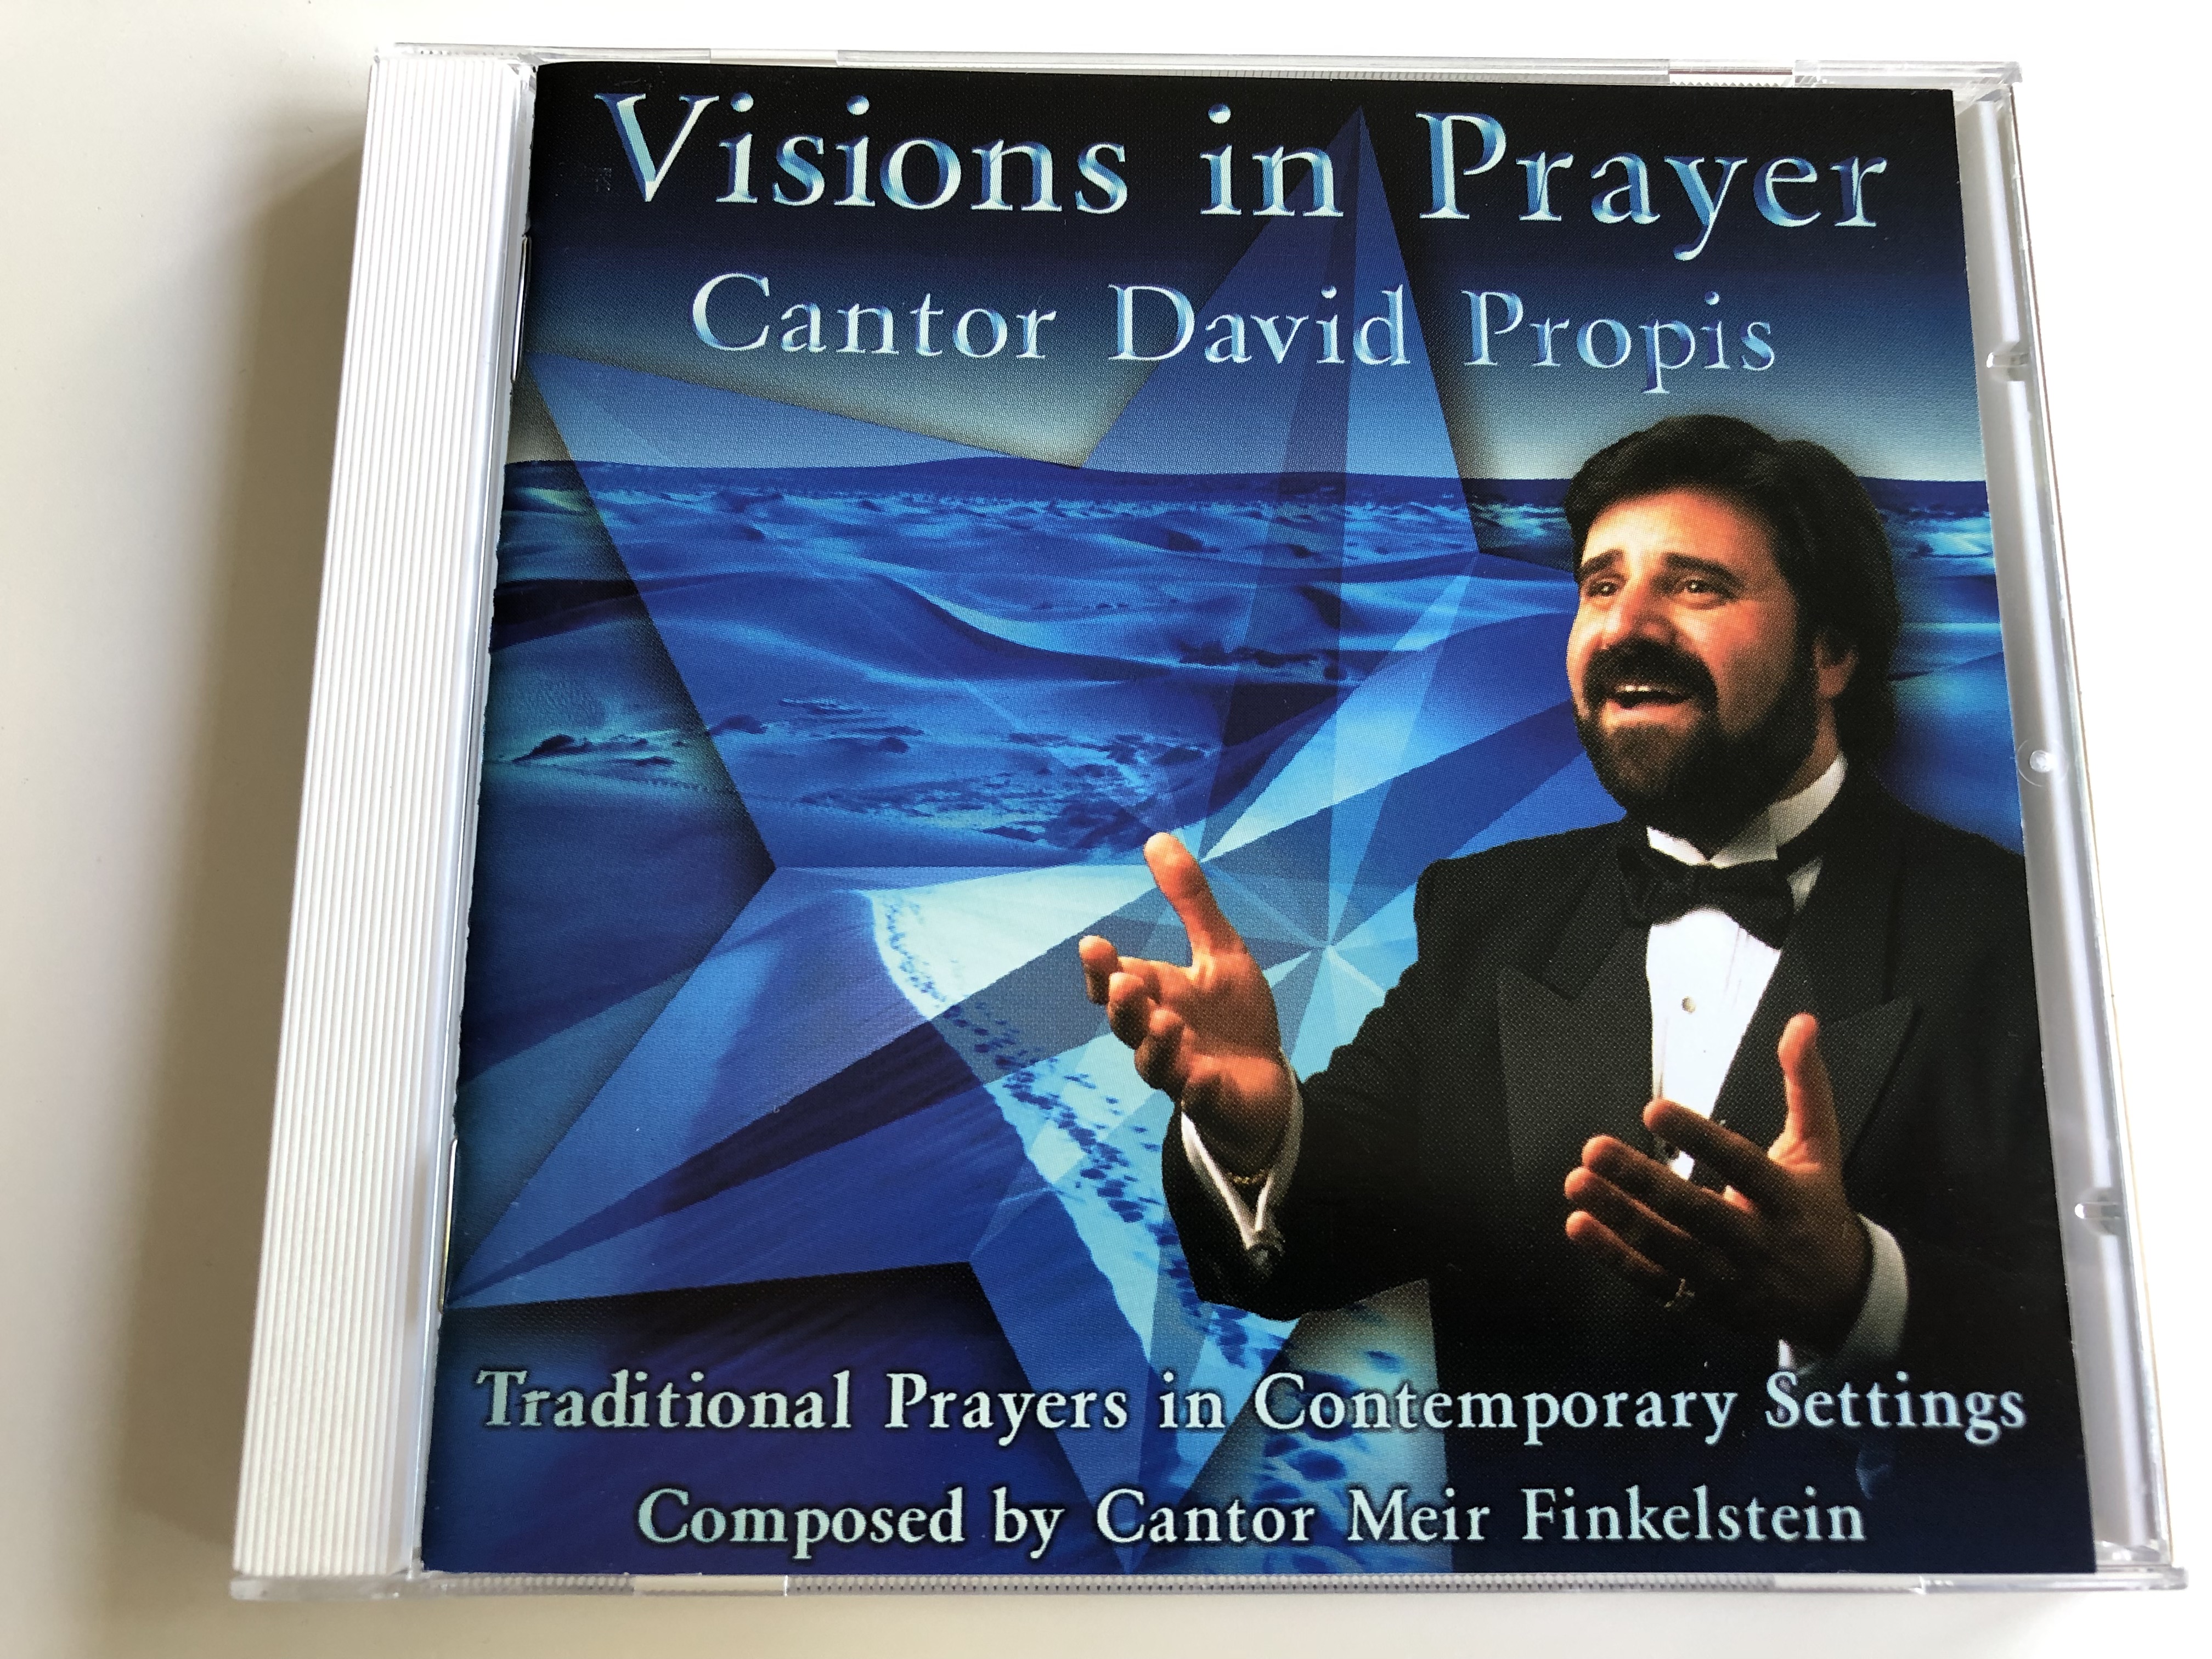 vision-in-prayer-cantor-david-propis-traditional-prayers-in-contemporary-settins-composed-by-cantor-meir-finkelstein-audio-cd-1995-1-.jpg